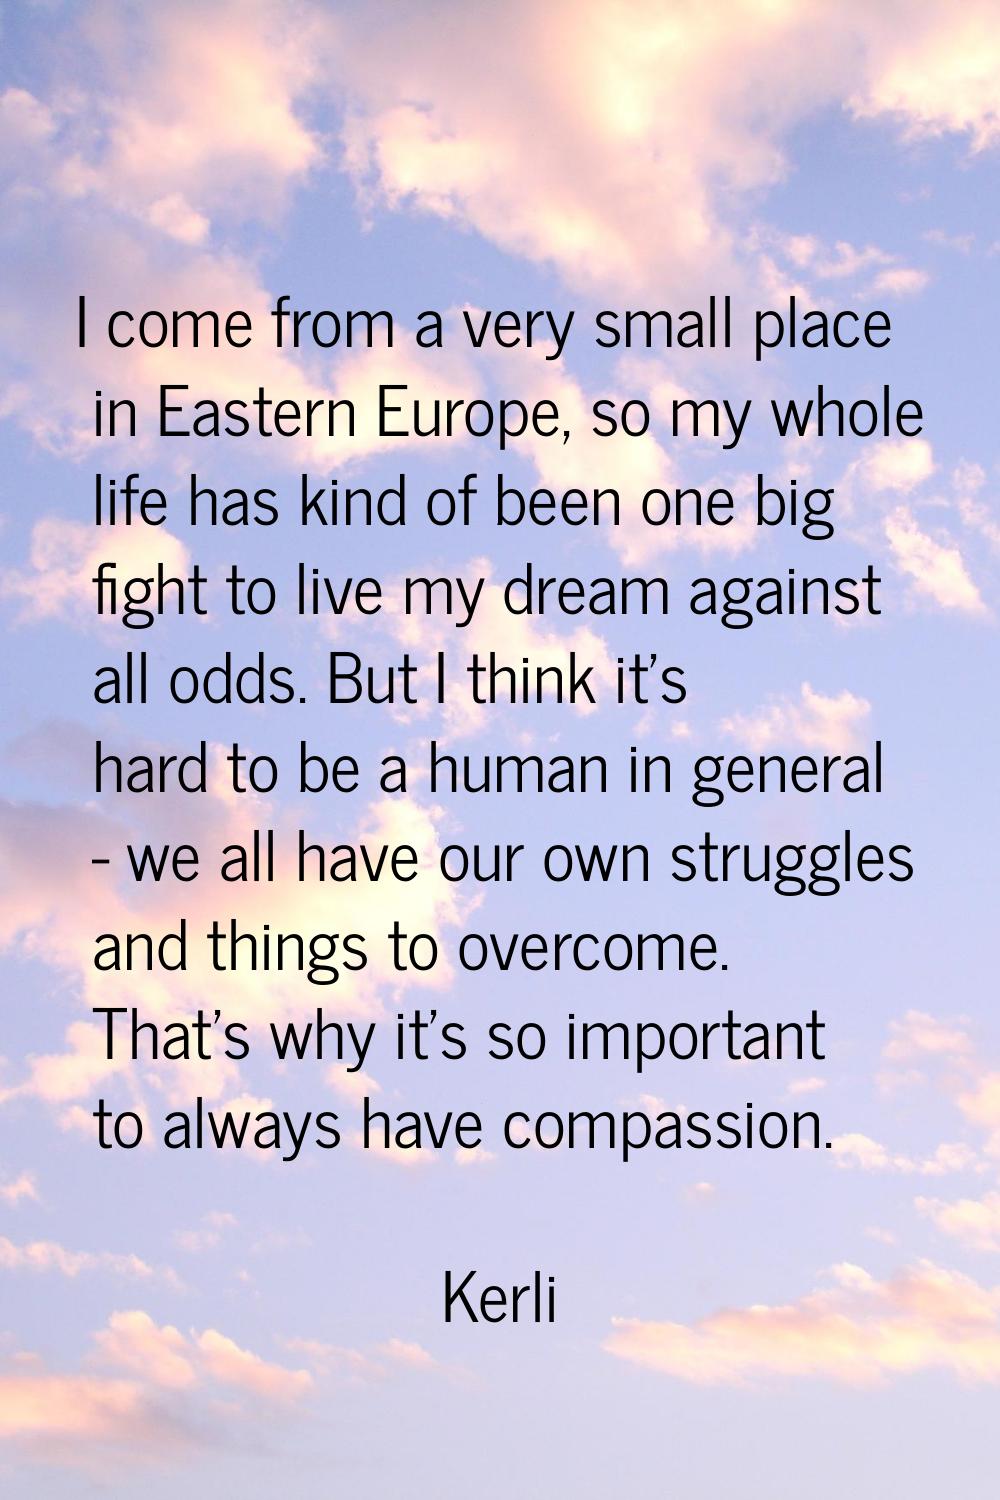 I come from a very small place in Eastern Europe, so my whole life has kind of been one big fight t